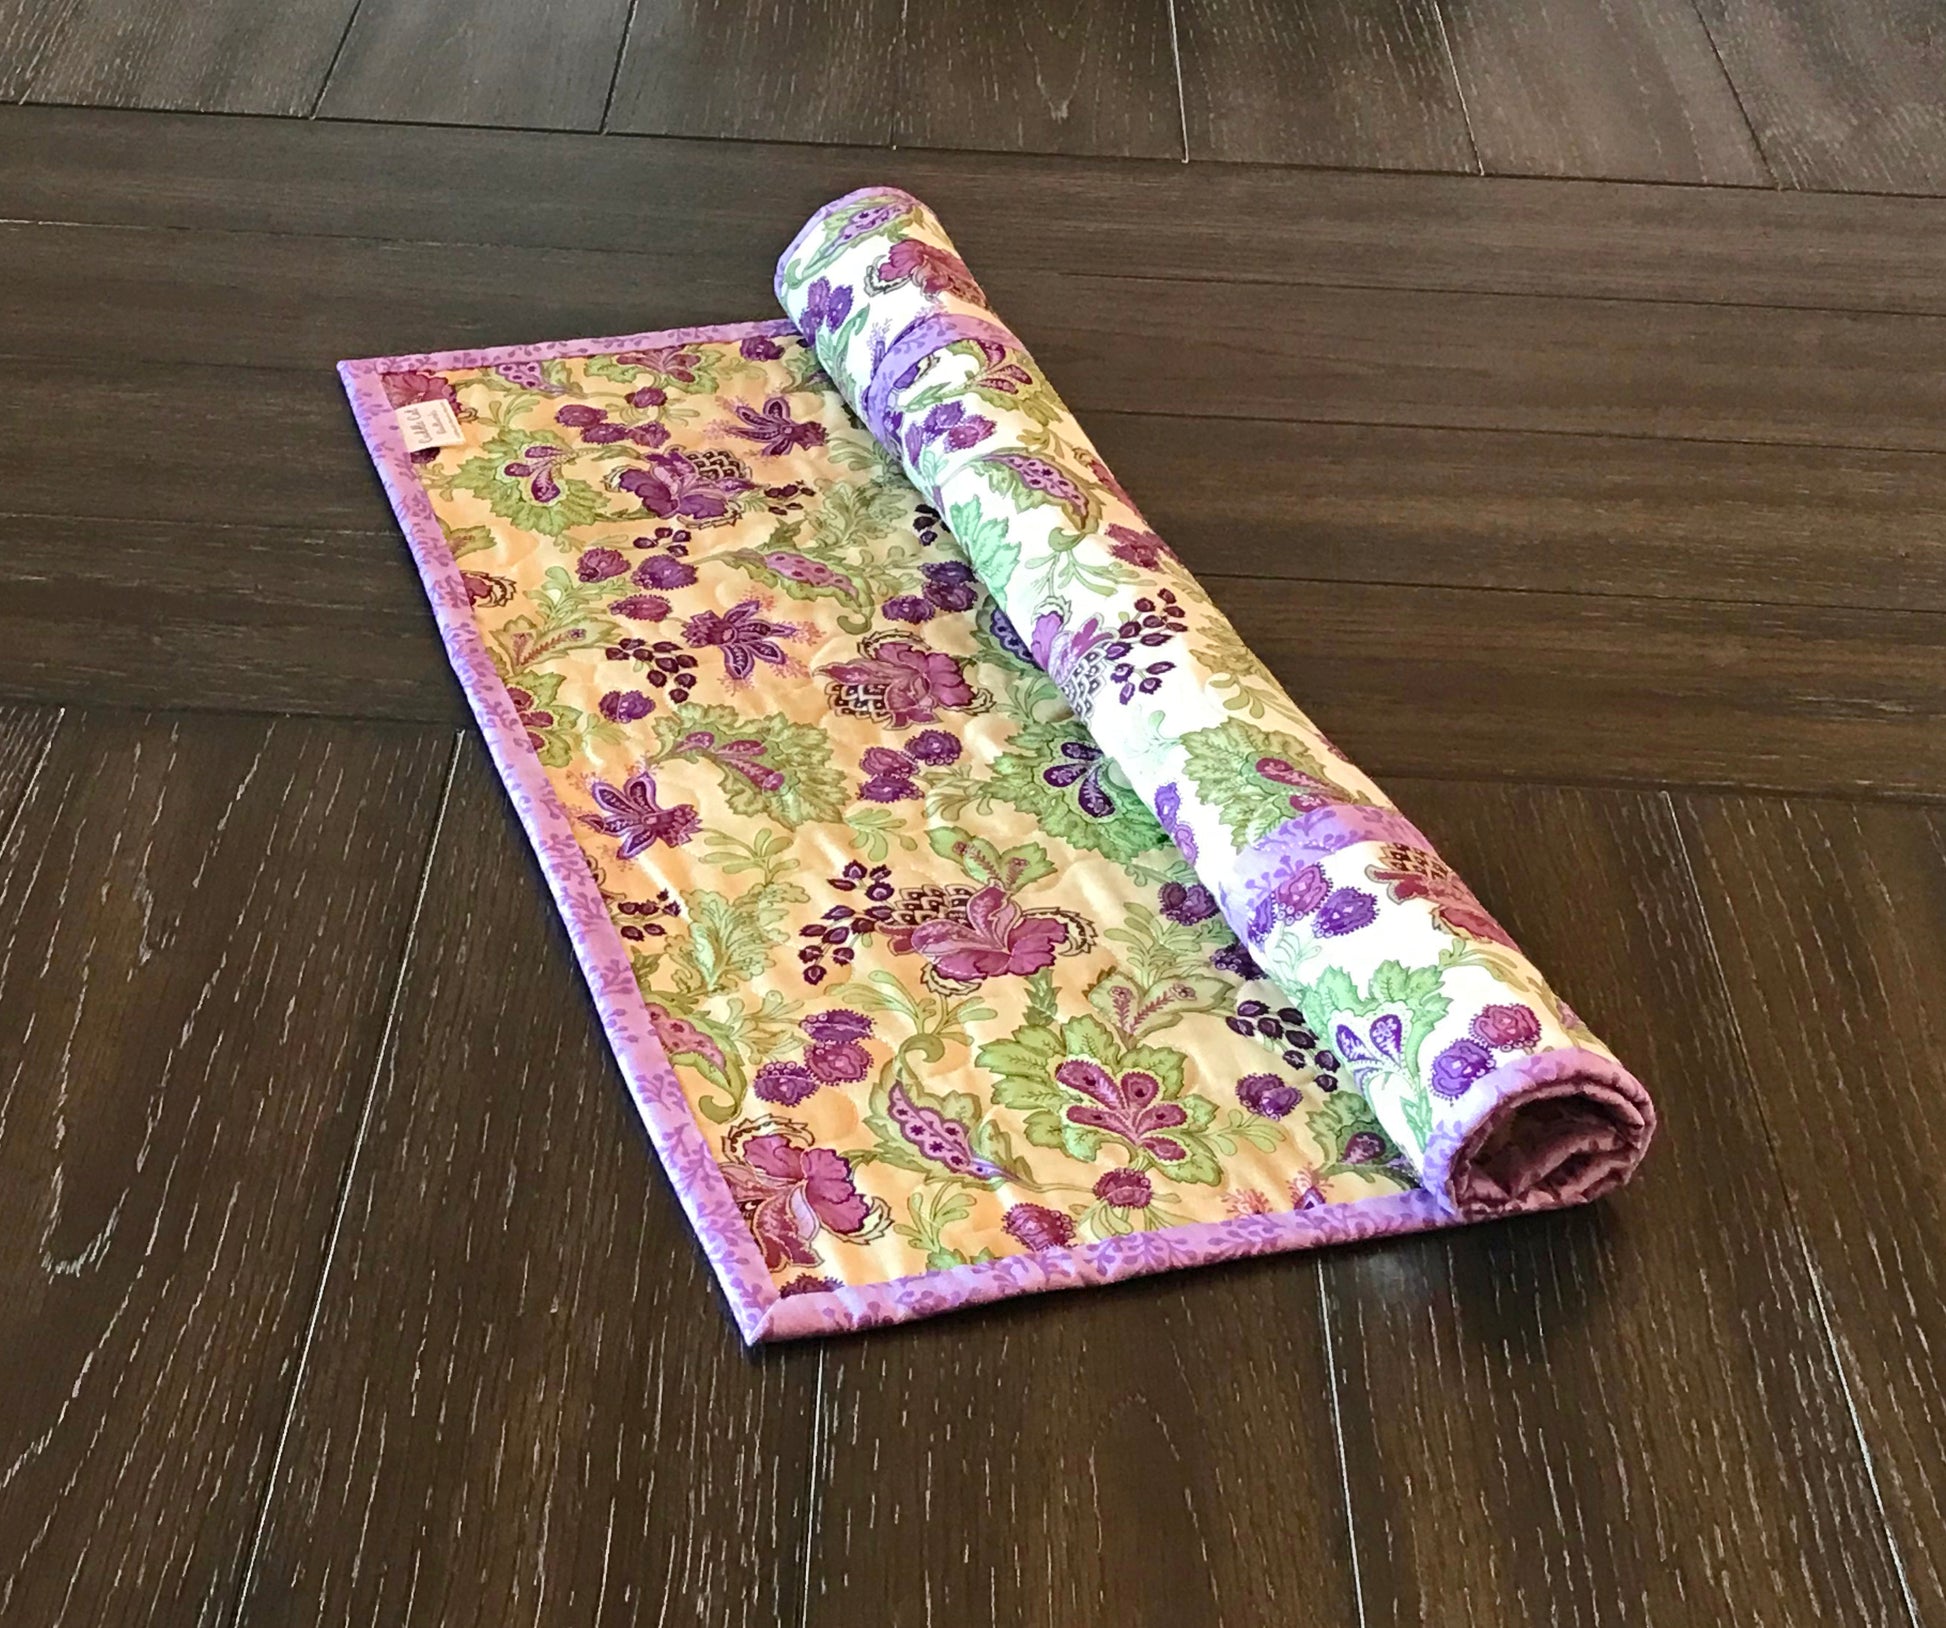 Purple and Green Jacobean Floral Table Topper - Handmade Quilts, Digital Patterns, and Home Décor items online - Cuddle Cat Quiltworks